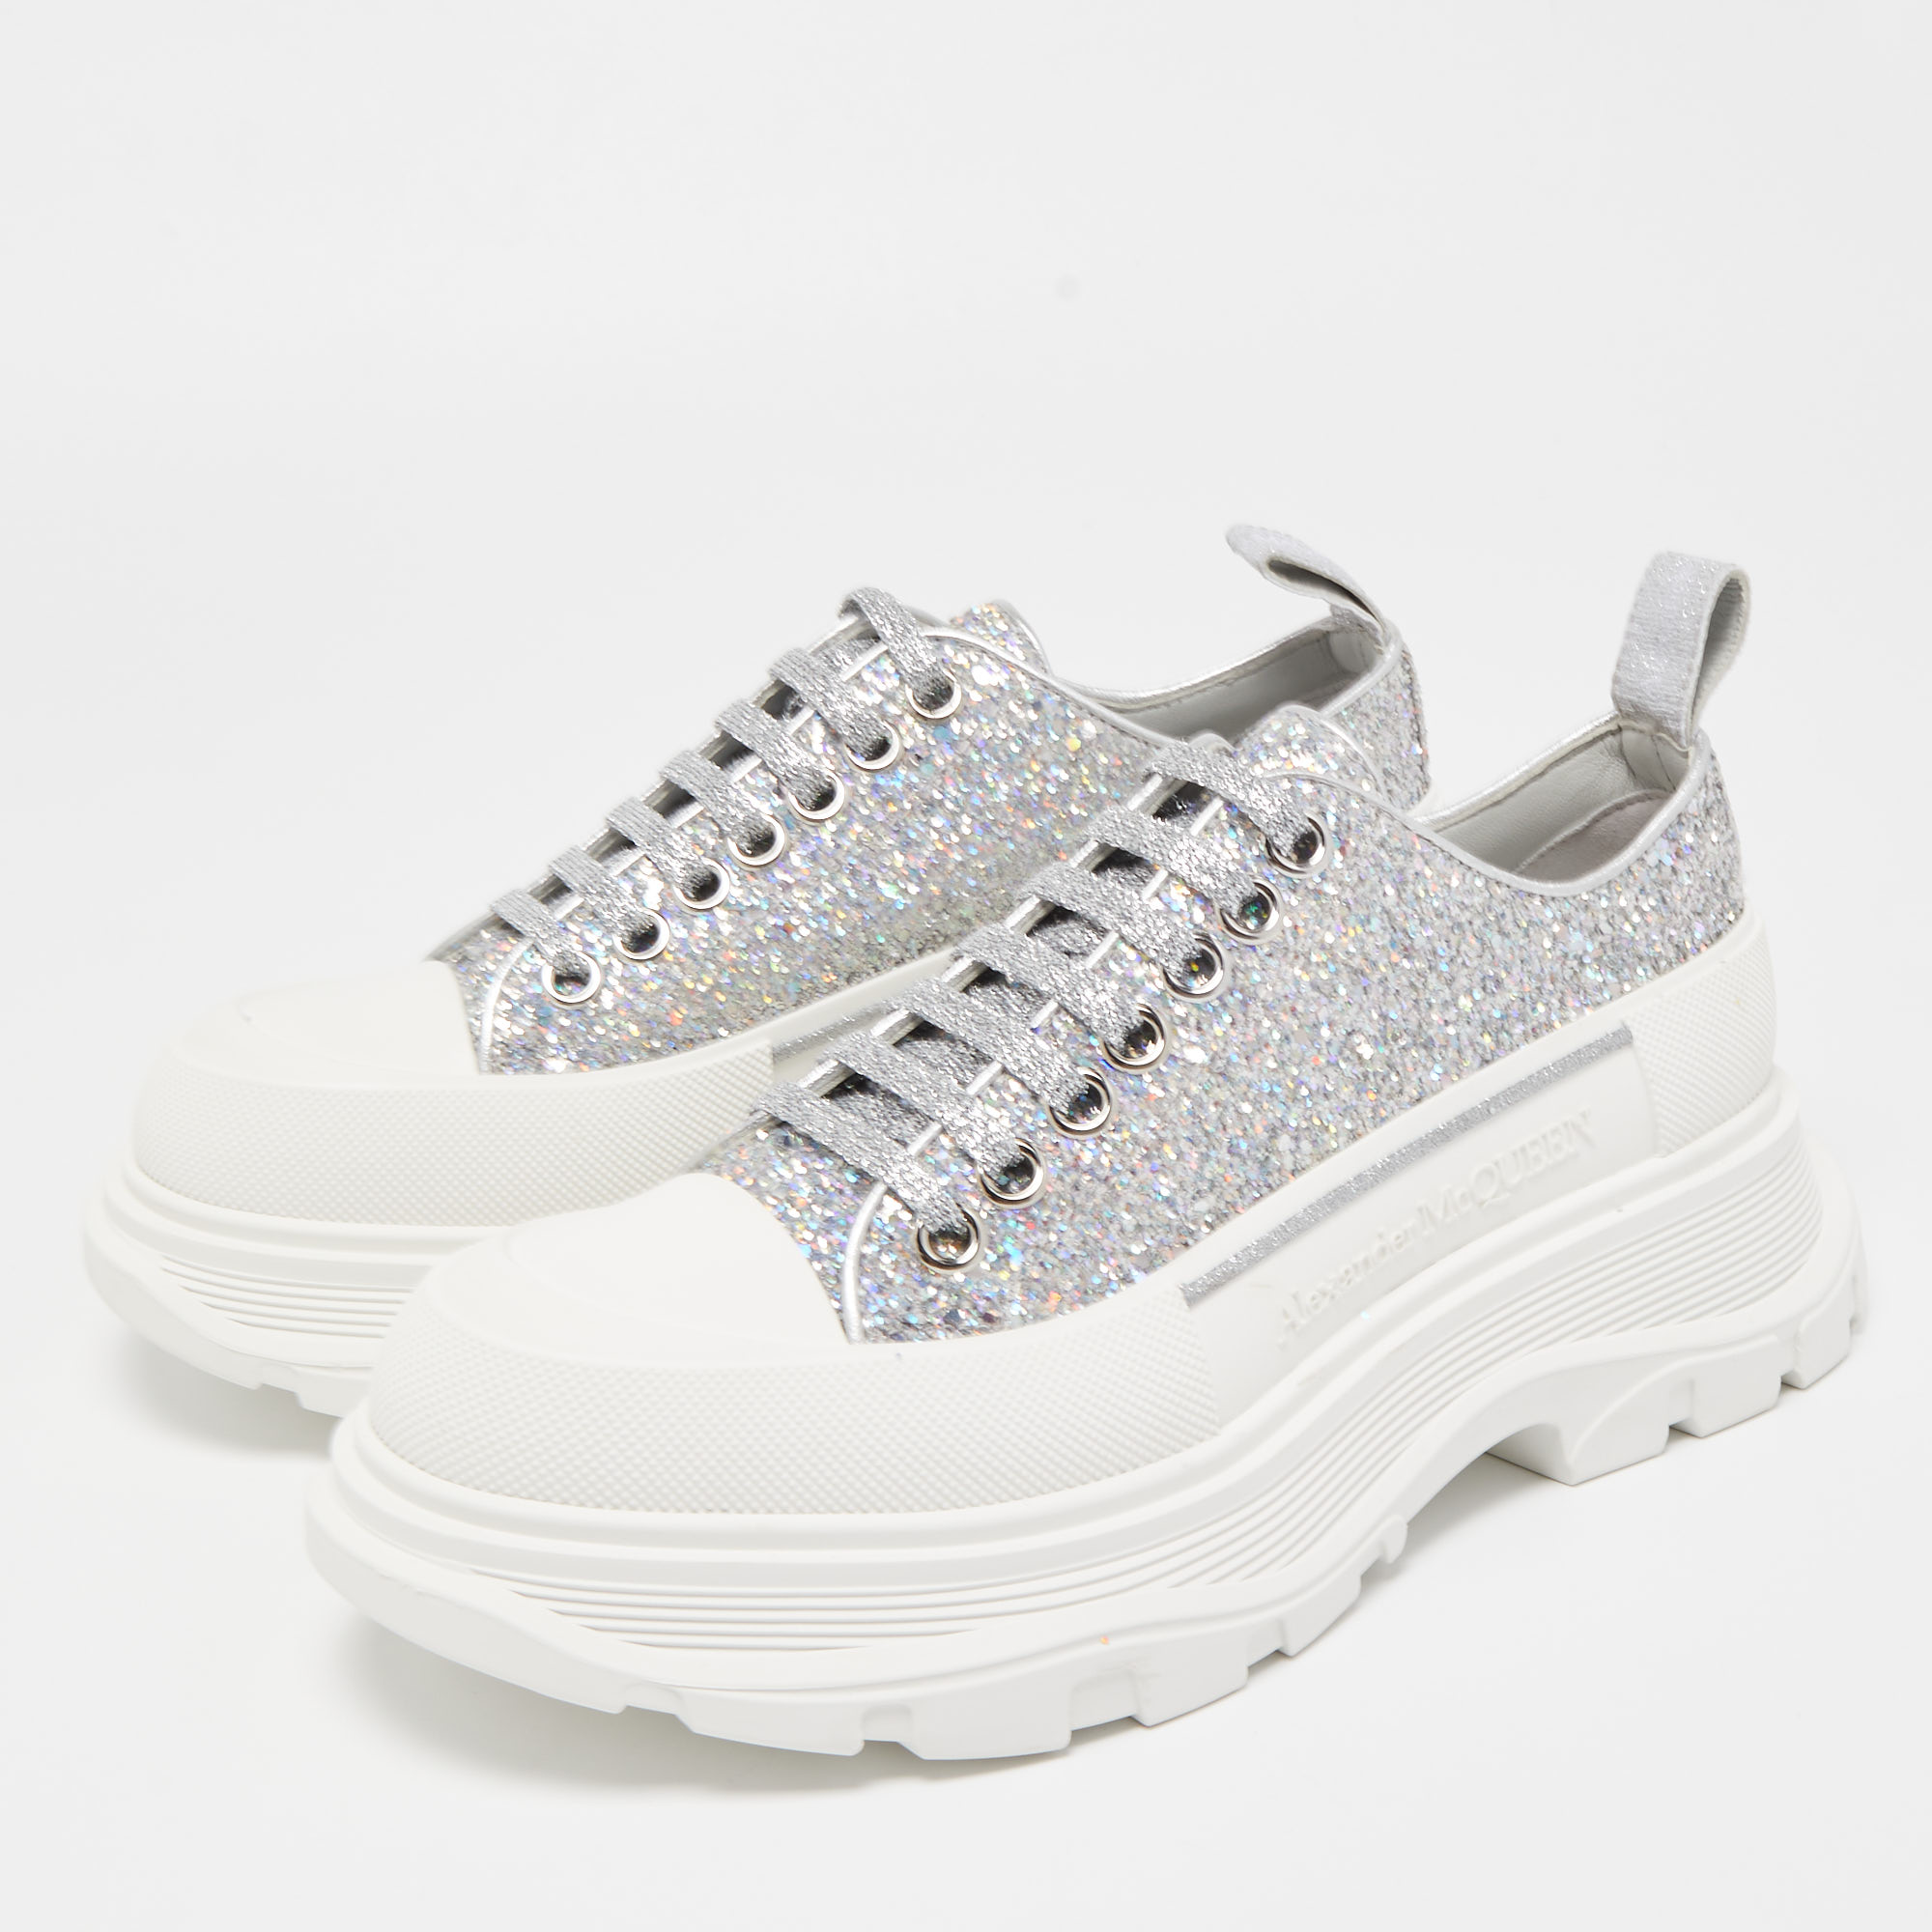 

Alexander McQueen Metallic Silver Glitter and Rubber Tread Slick Low Top Sneakers Size, White